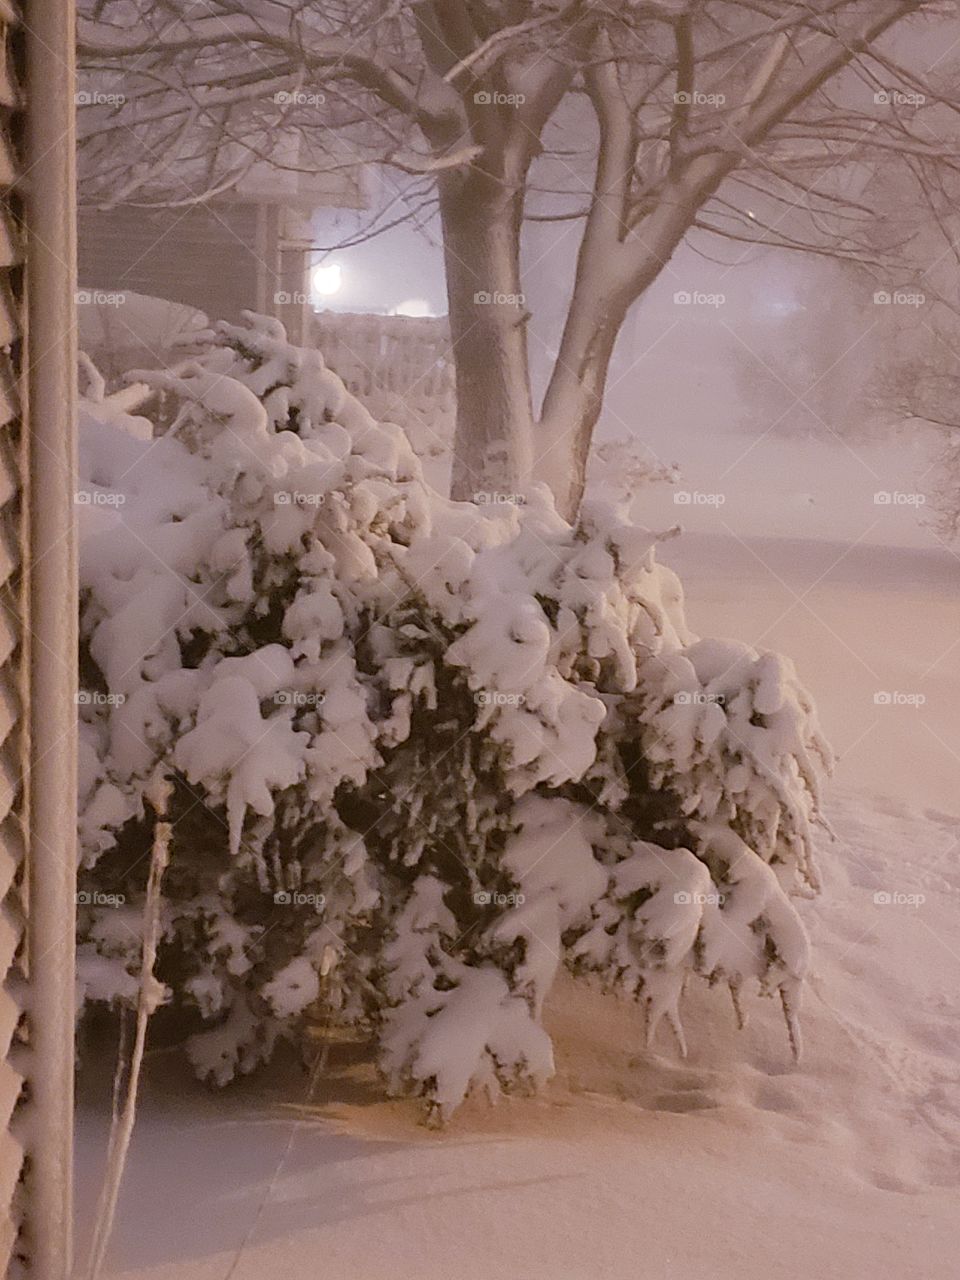 Beautiful Blizzard conditions in the Midwest